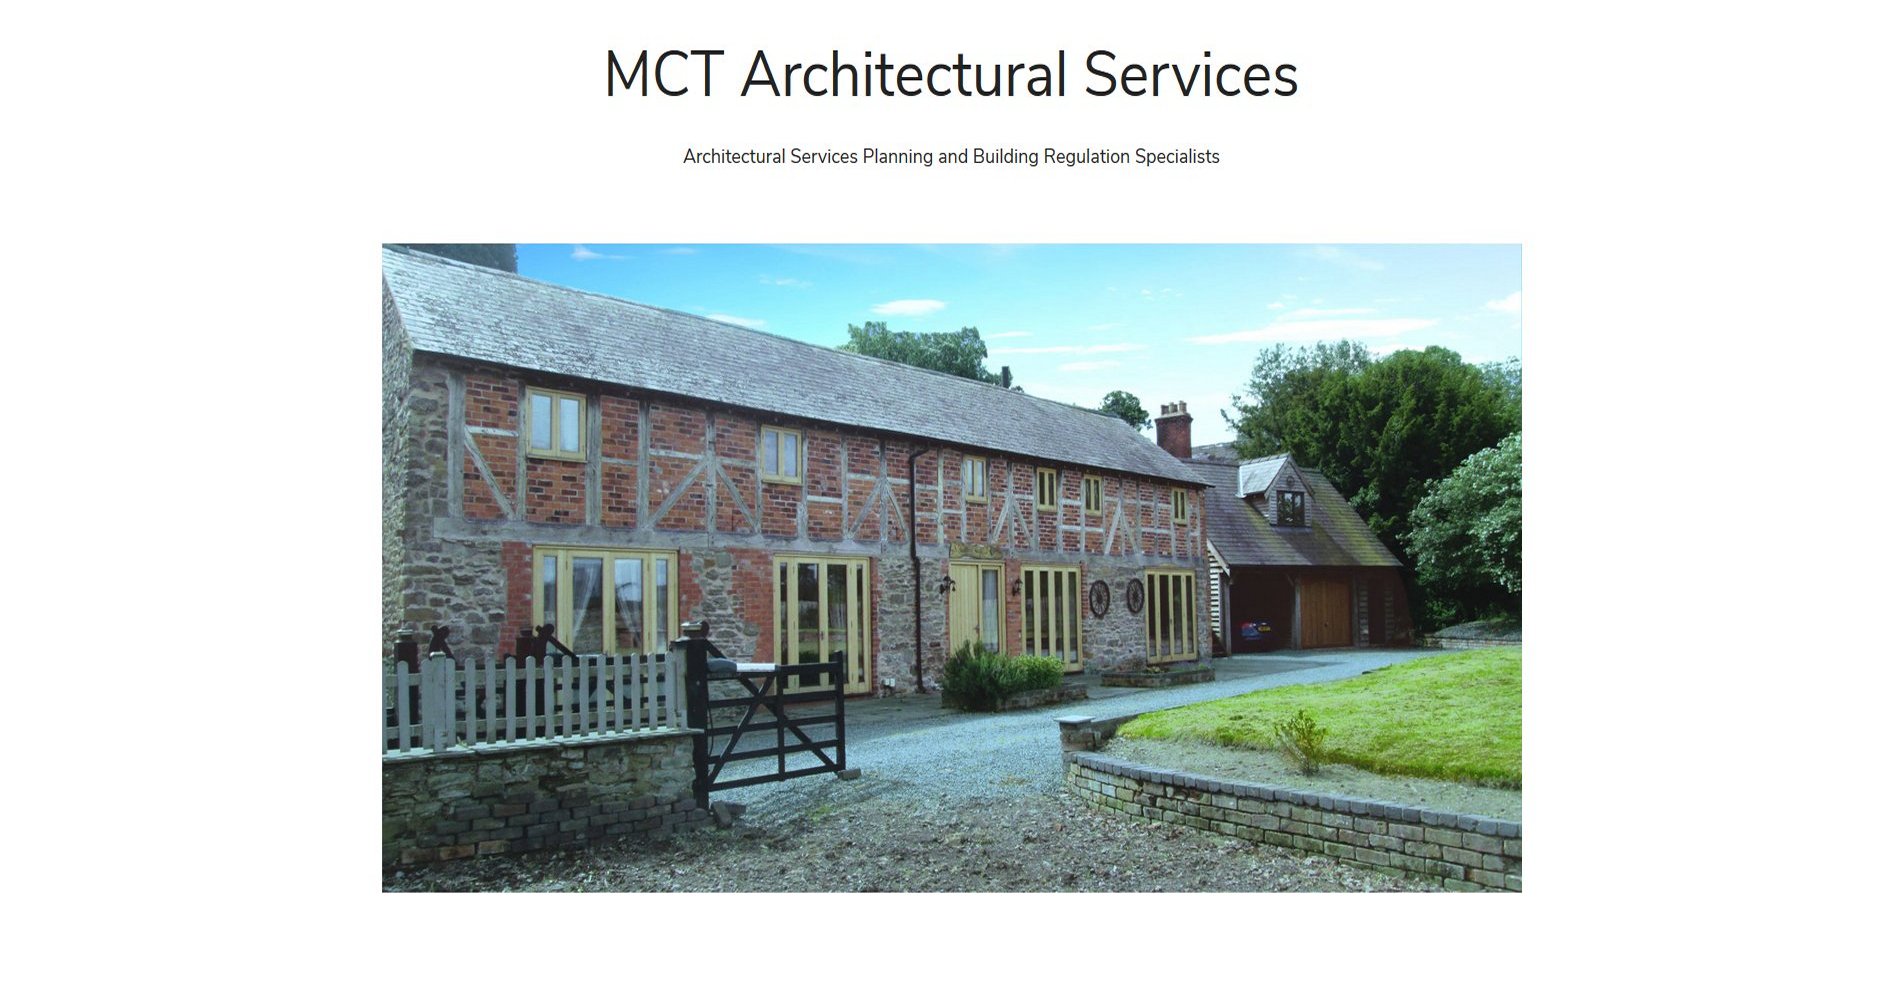 MCT Architectural Services